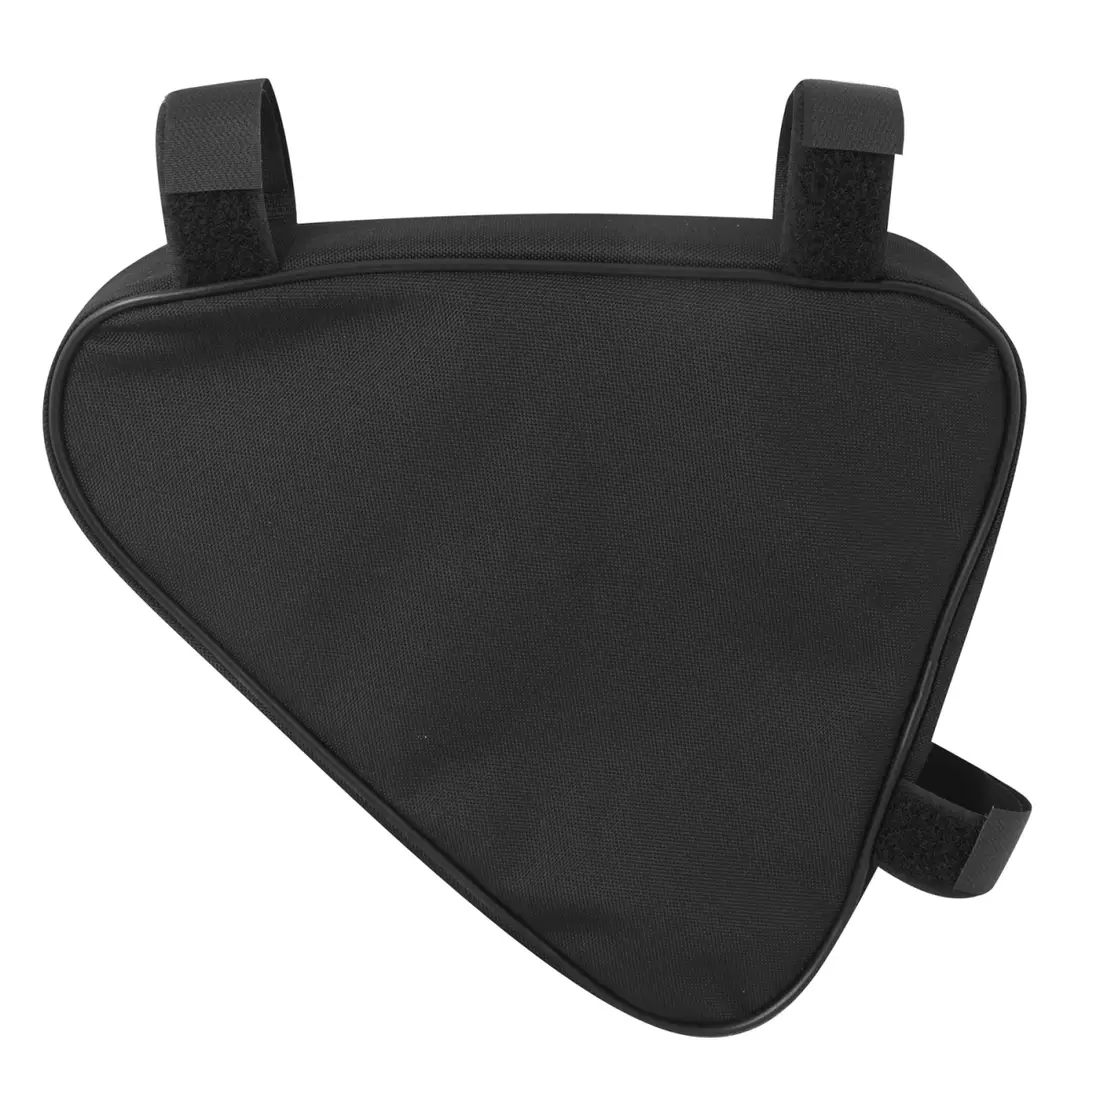 FORCE 896025 CLASSIC frame pouch, triangular